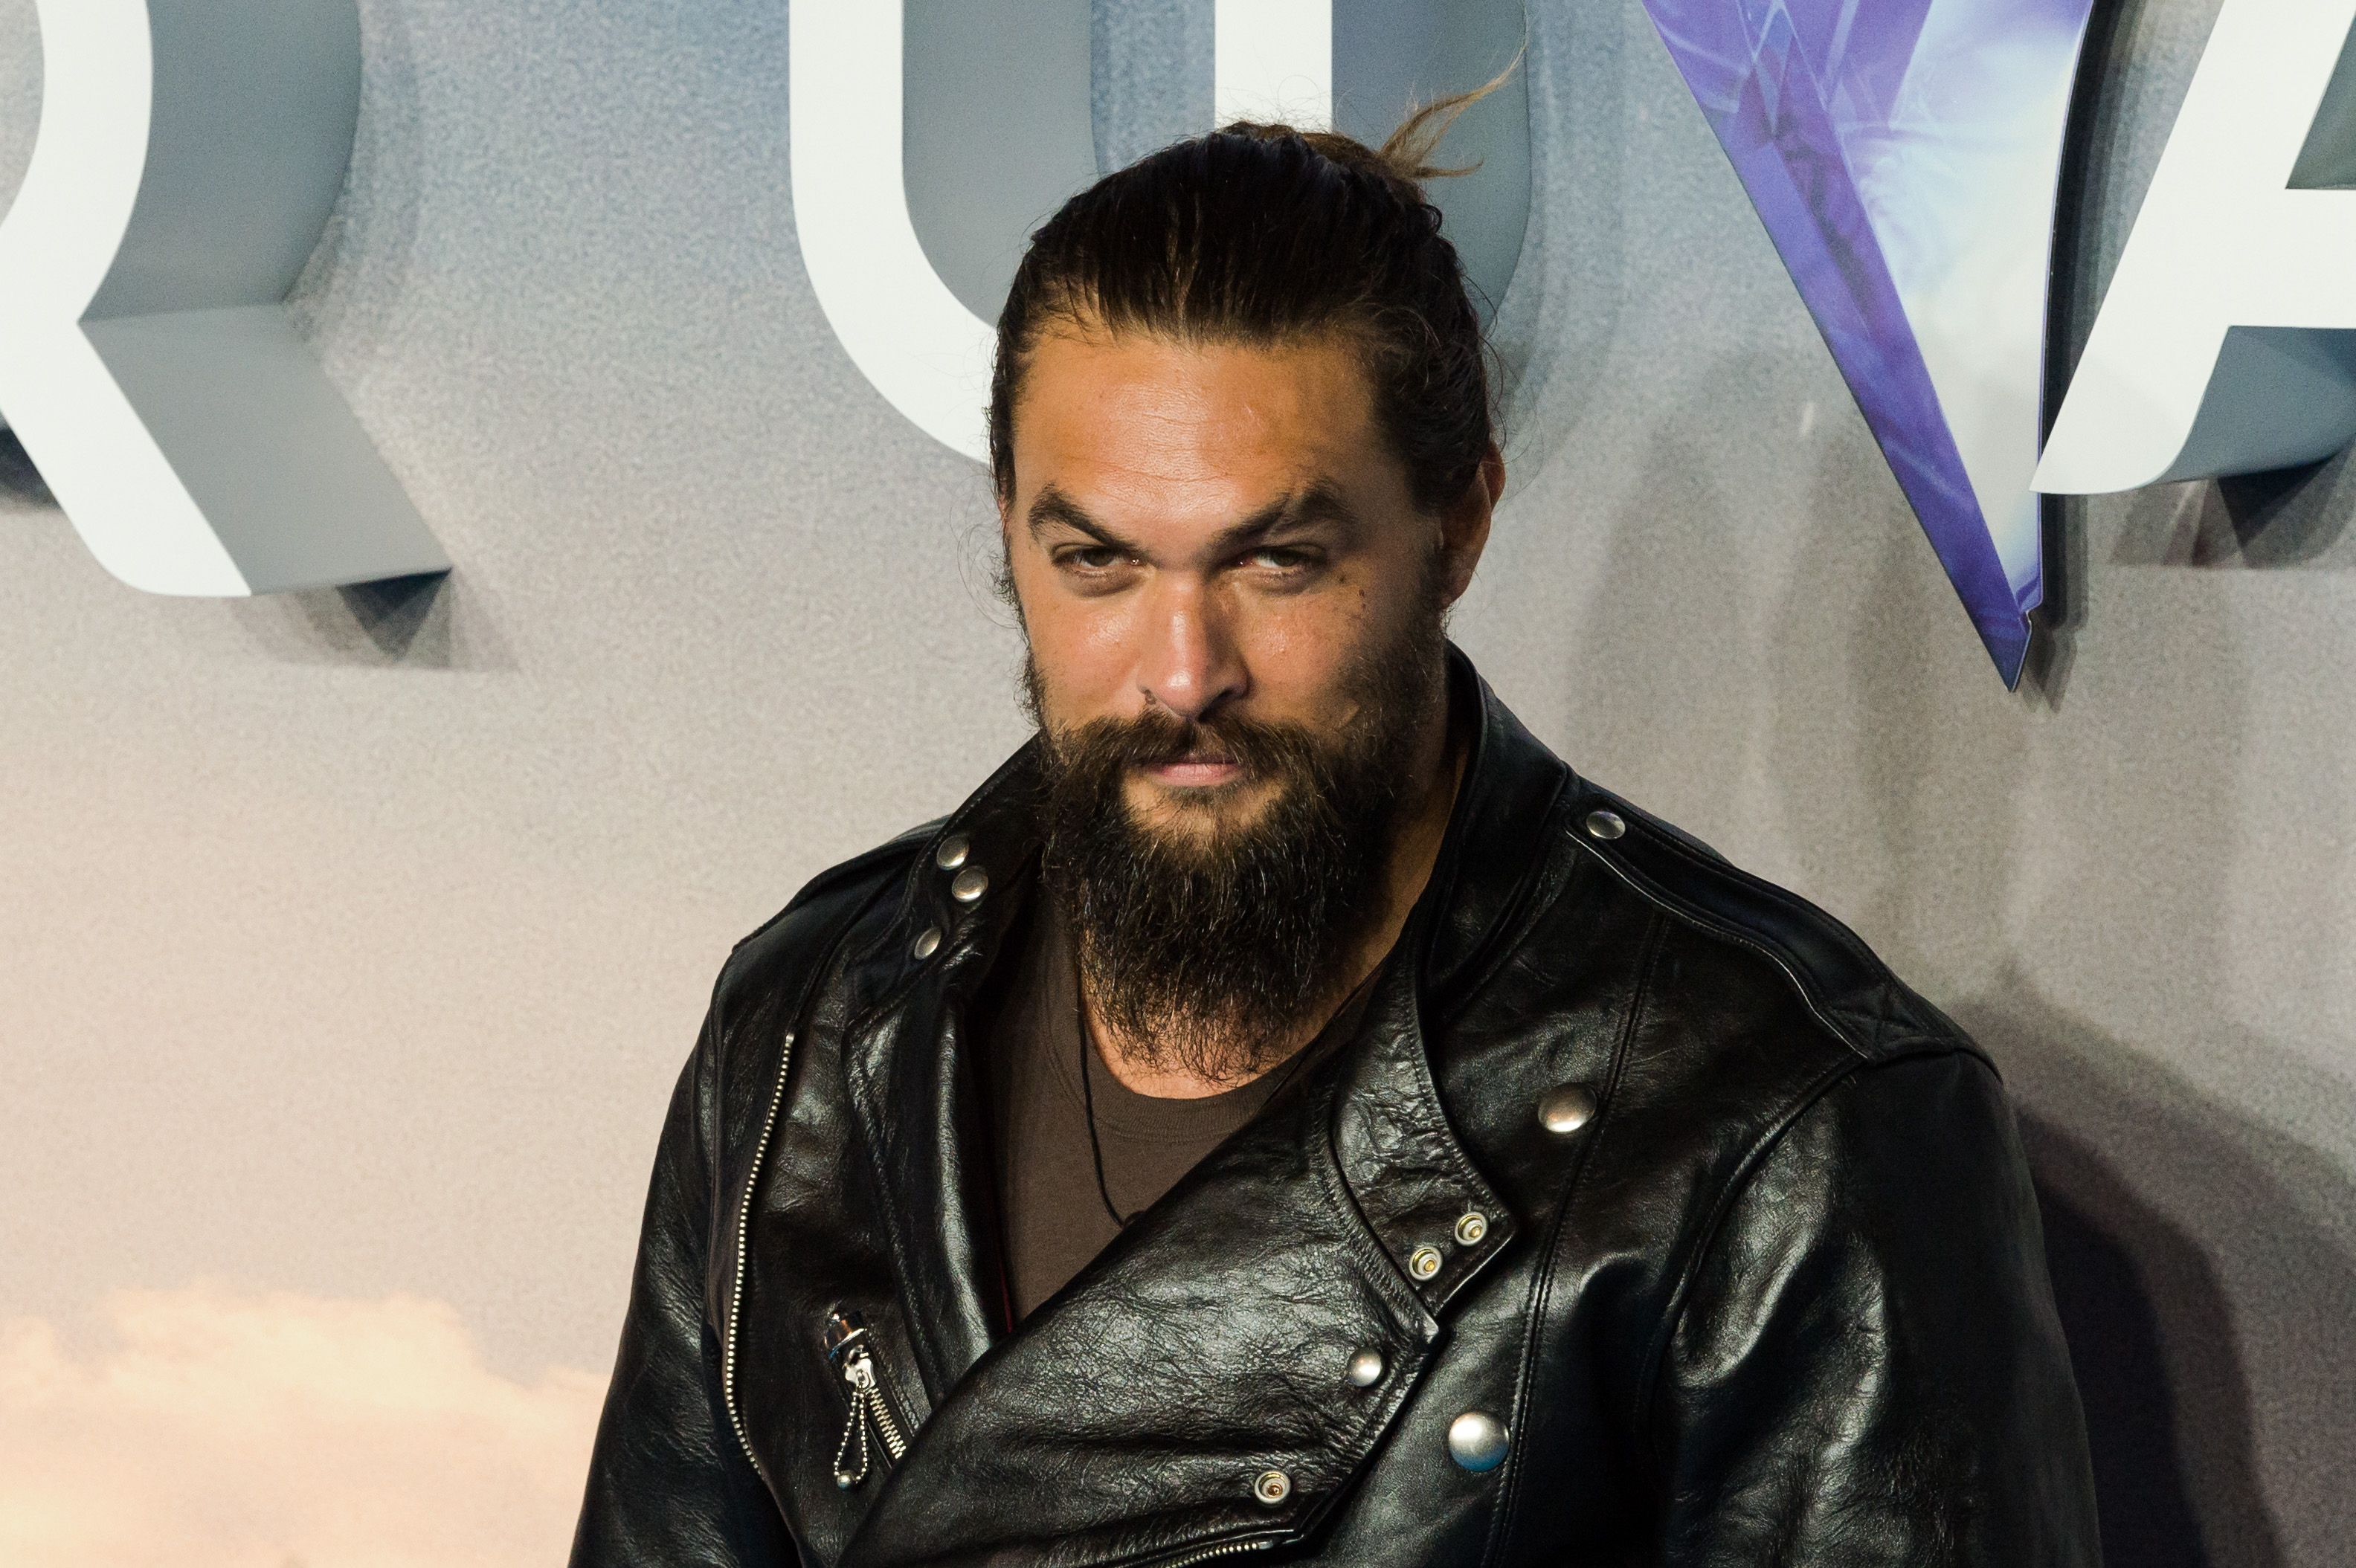 Jason Momoa at the world premiere of "Aquaman" at  Cineworld in London's Leicester Square on November 26, 2018 | Source: Getty Images